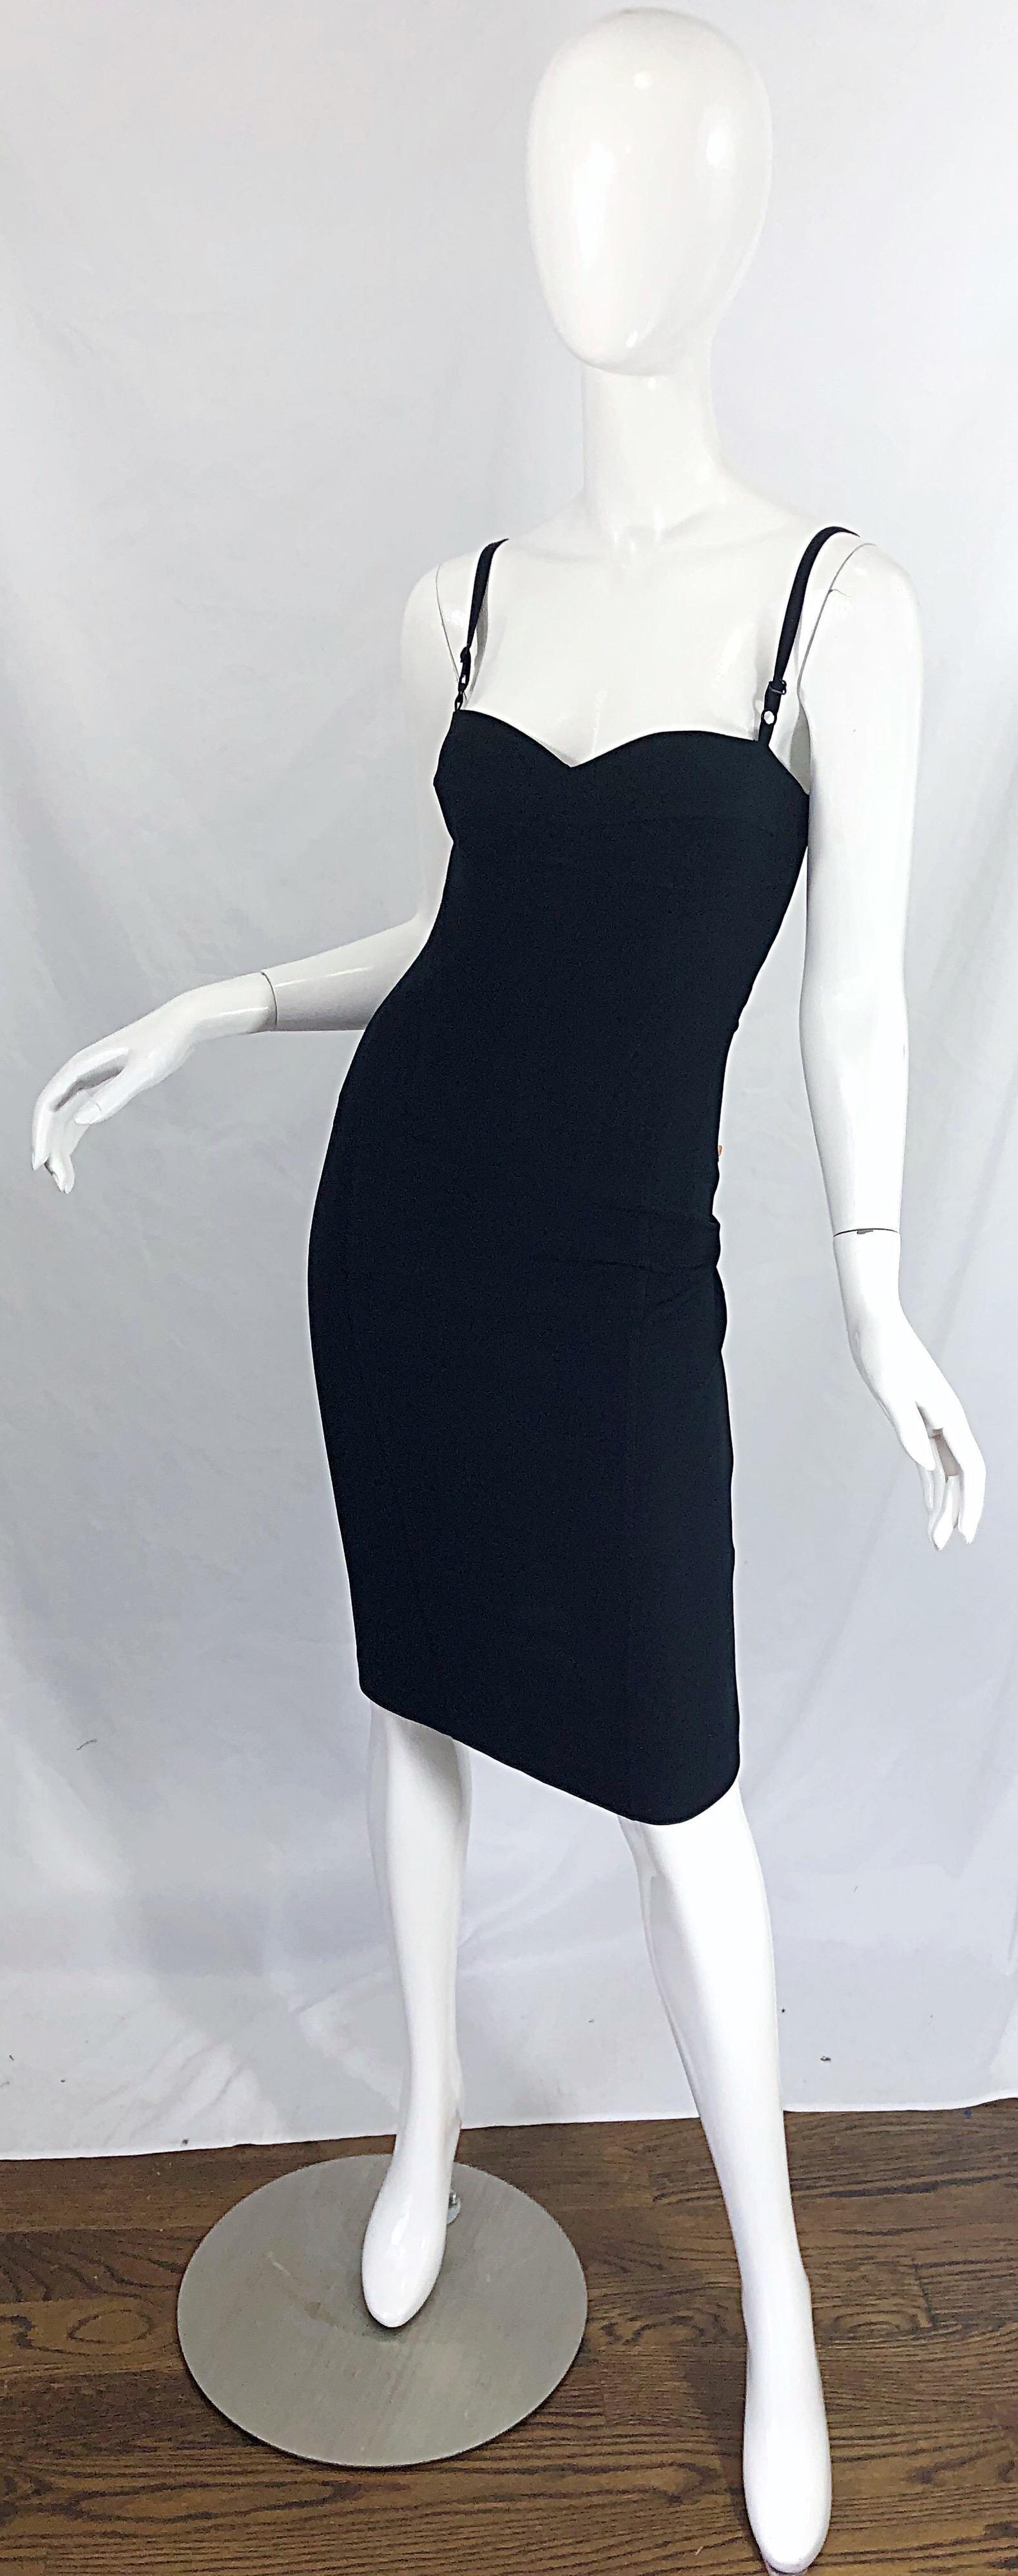 1990s Dolce & Gabbana Black Corset Dress Size 42 US 6 - 8 Vintage 90s Iconic LBD In Excellent Condition For Sale In San Diego, CA